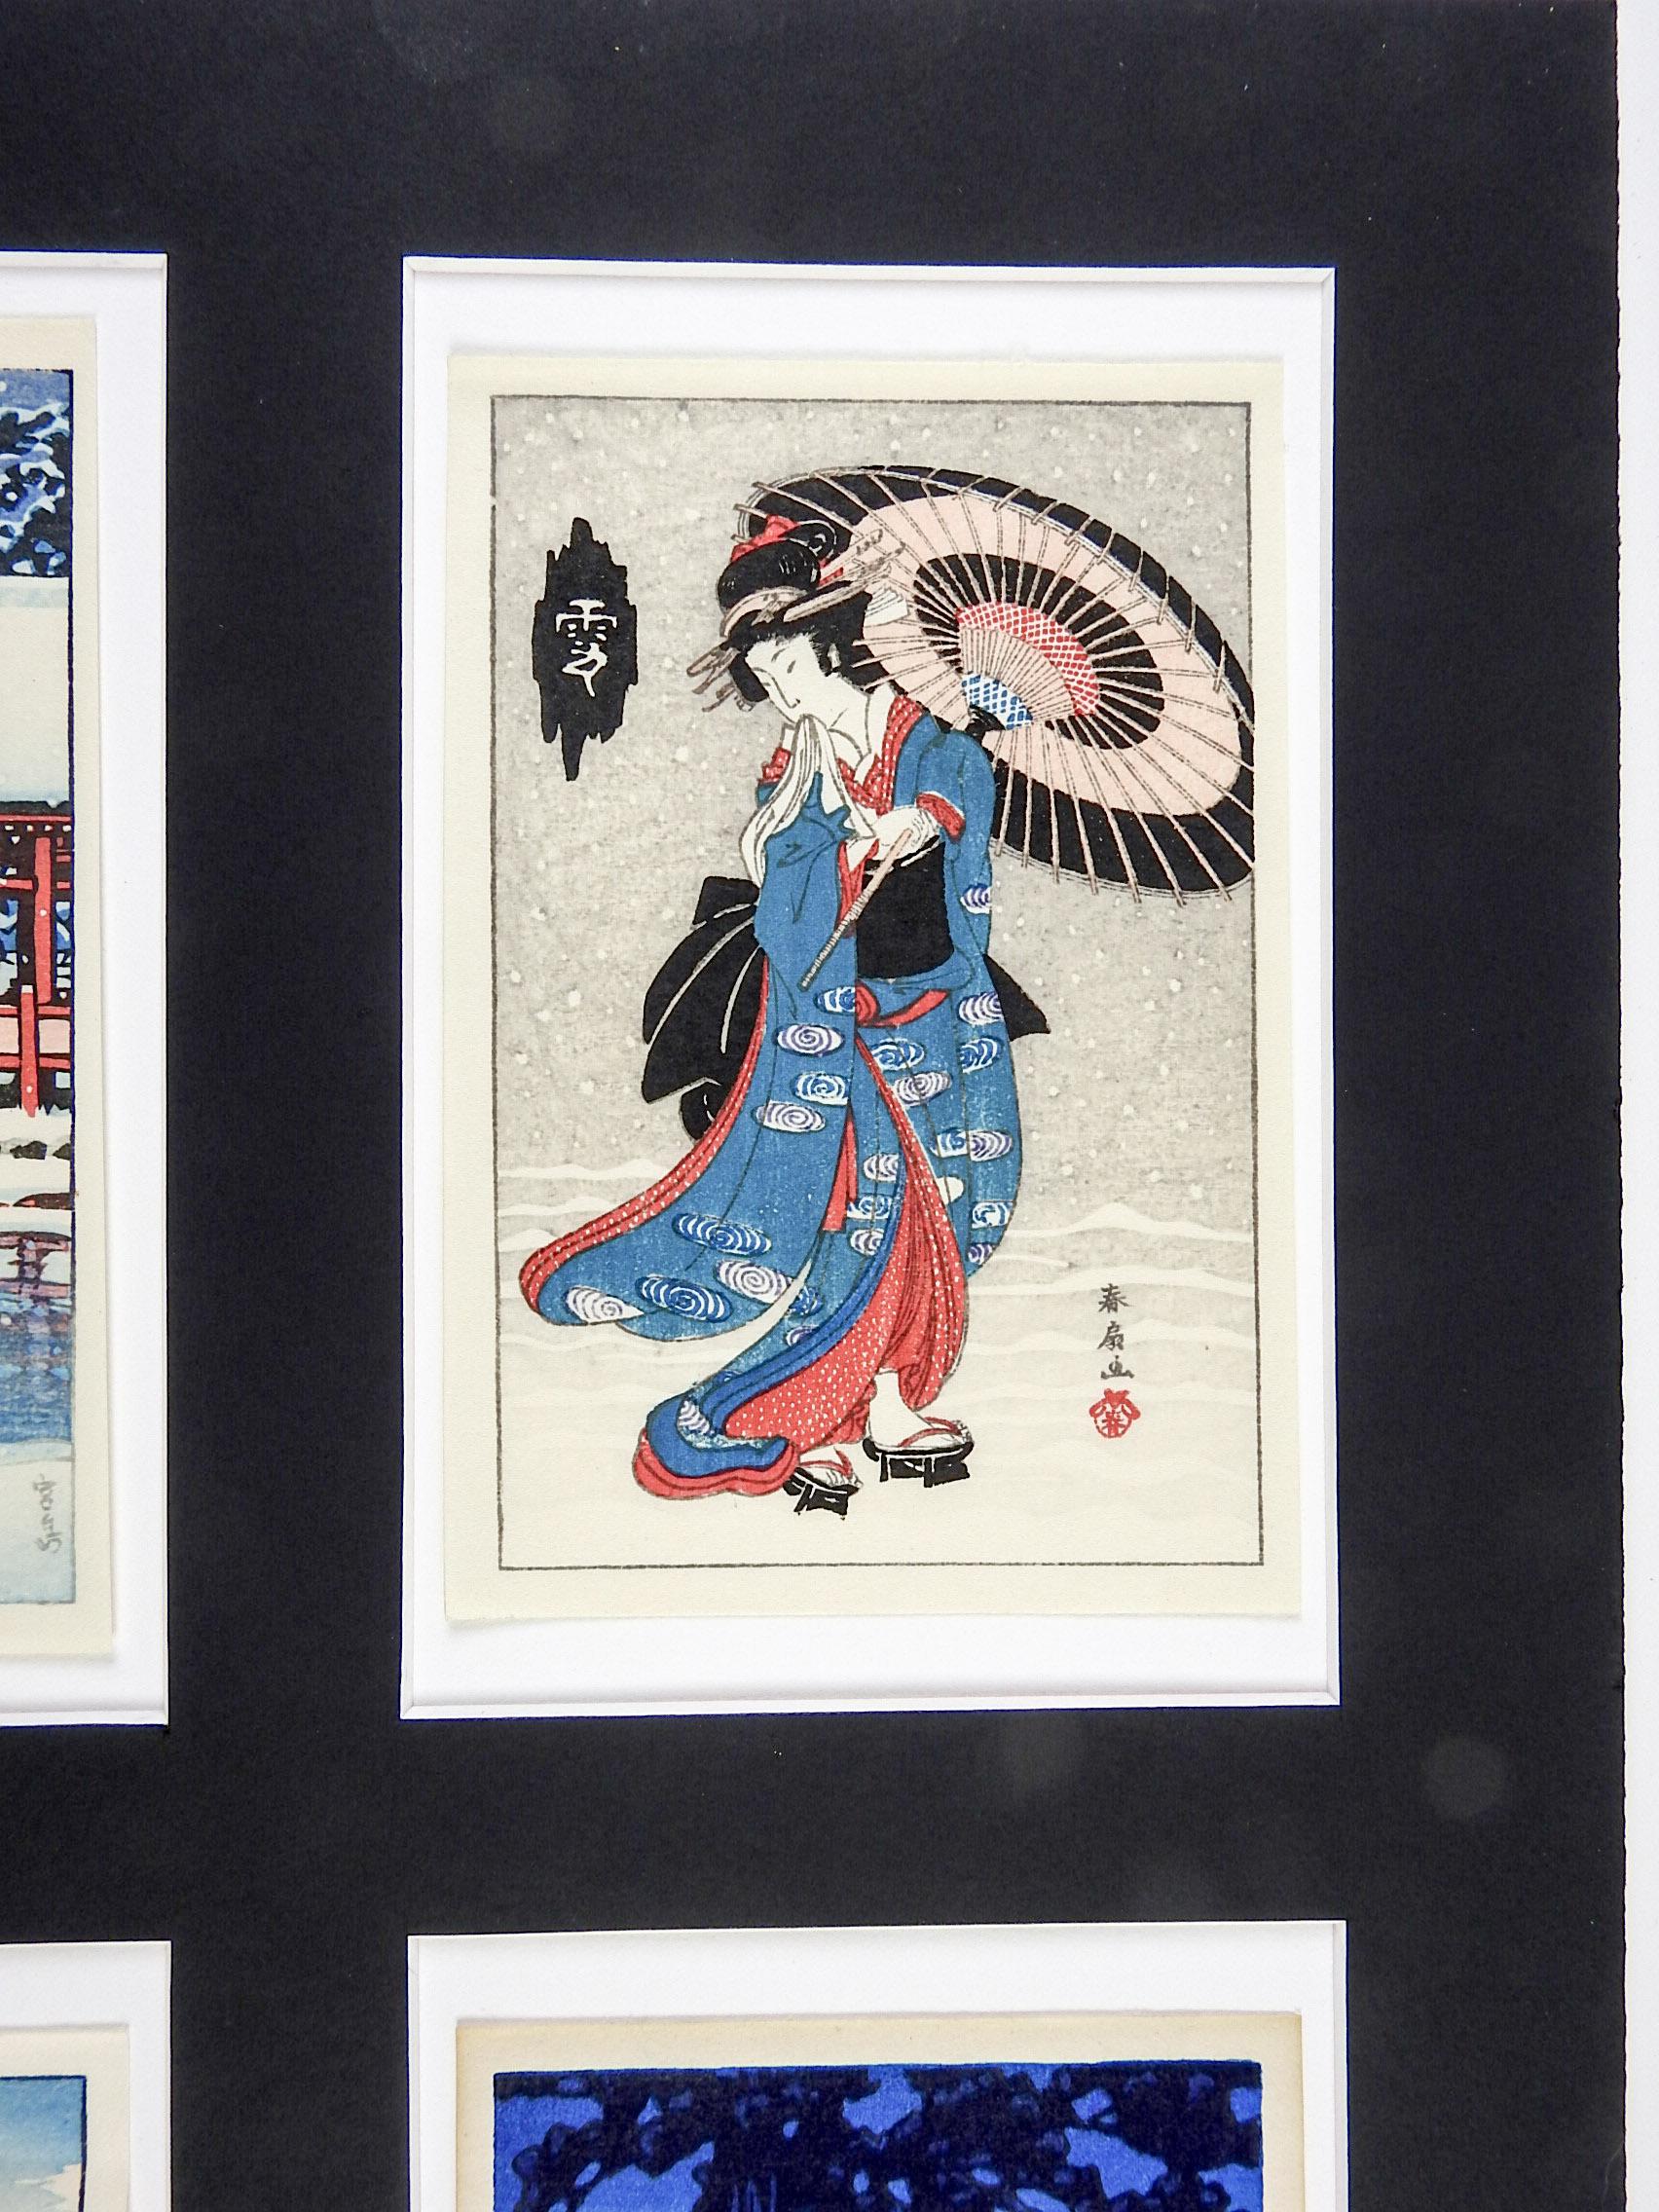 Group of four Japanese miniature woodblock prints mounted in one mat. Torii gate, woman with umbrella, shrine and evening scene. The night scene is by Kawase Hasui (1883-1957). Unframed, displayed mounted in mat with each print tipped into opening.